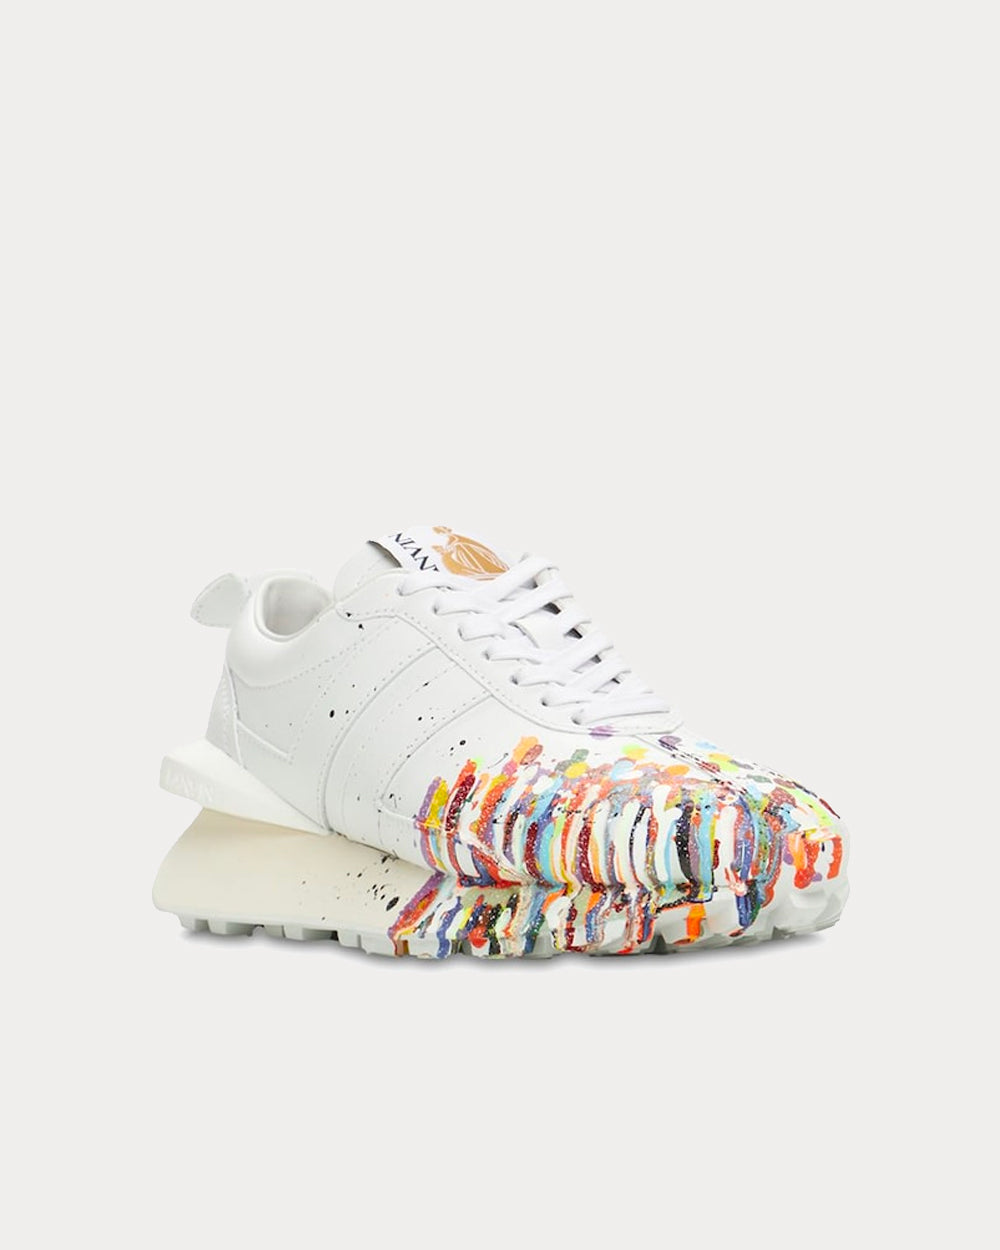 Lanvin x Gallery Dept - BumpR Painted White Low Top Sneakers